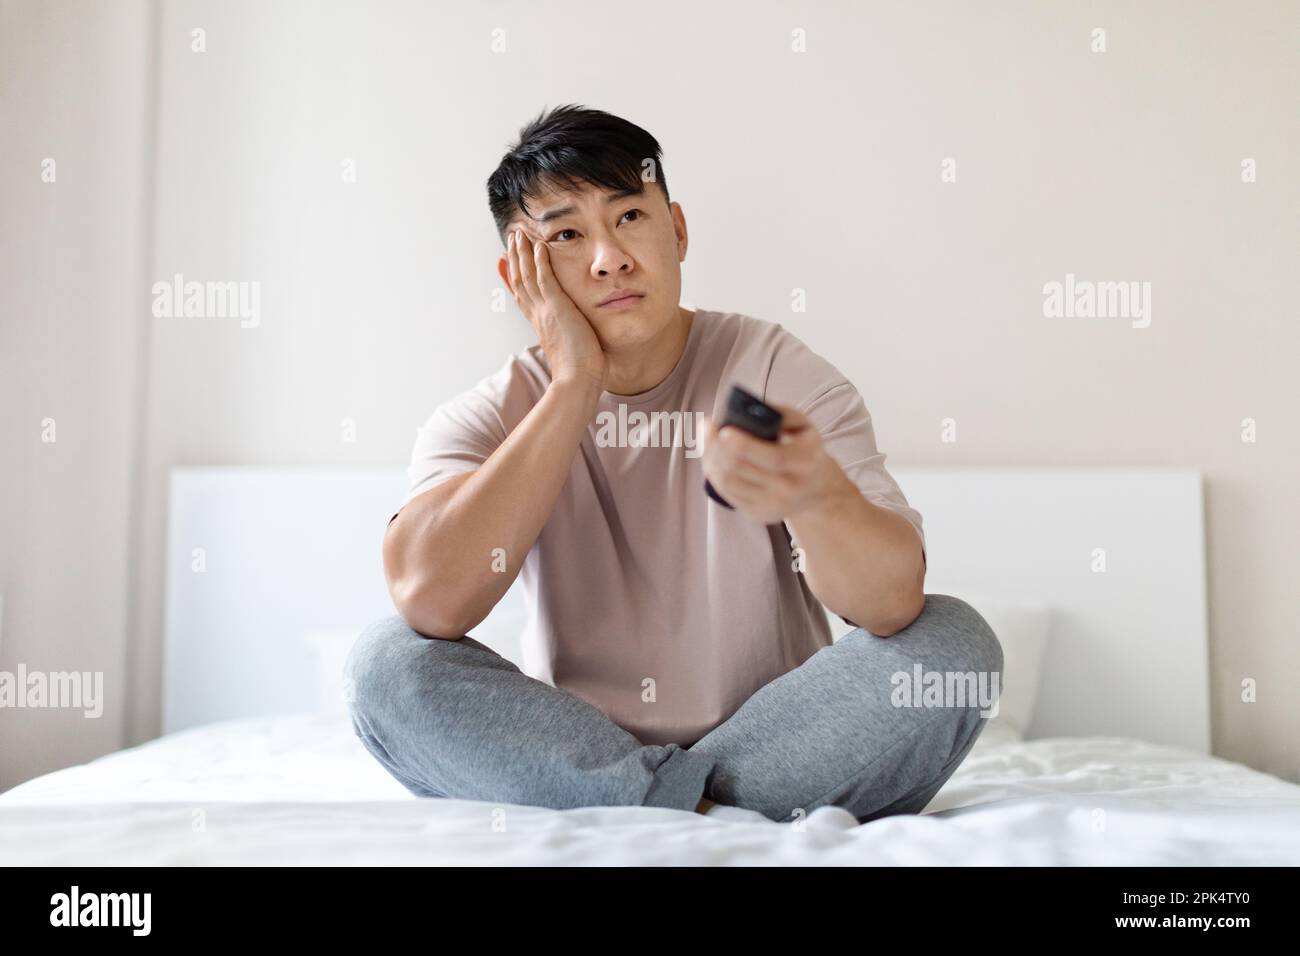 Dull asian man sitting on bed at home, holding remote Stock Photo